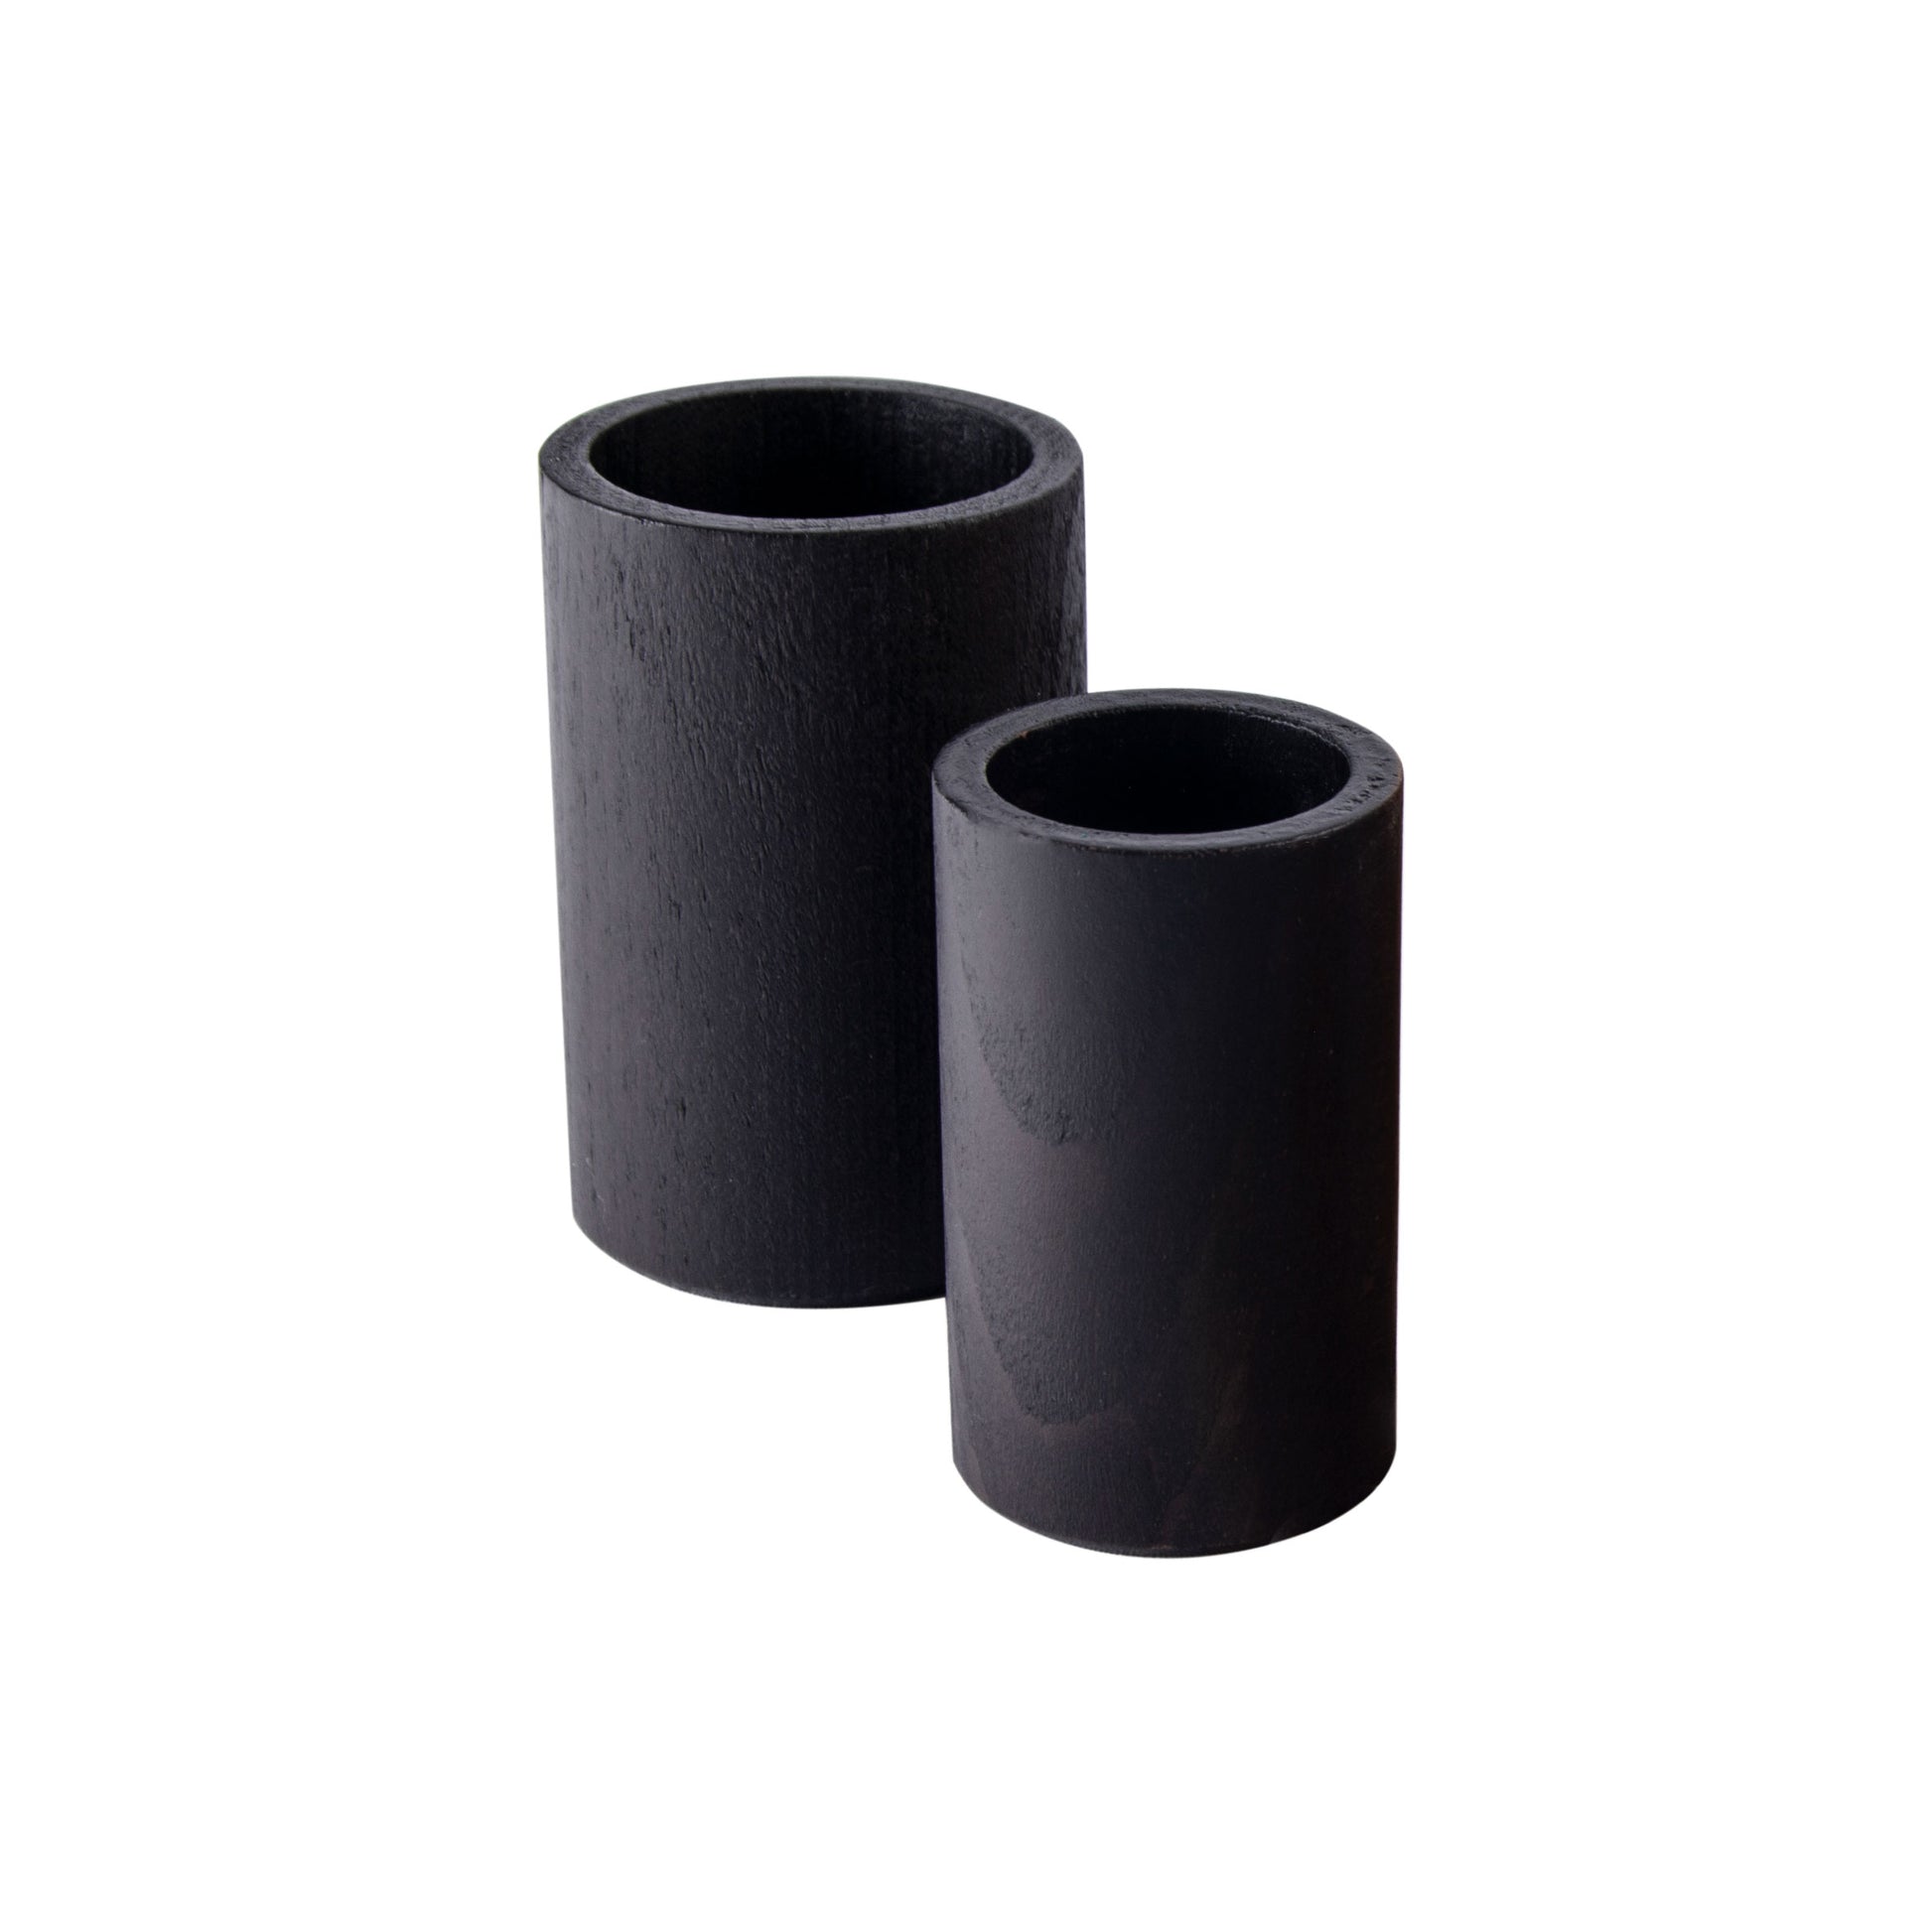 WOODEN DICE CUPS in black color - set of 2 - Premium Backgammon from MANOPOULOS Chess & Backgammon - Just €21.50! Shop now at MANOPOULOS Chess & Backgammon